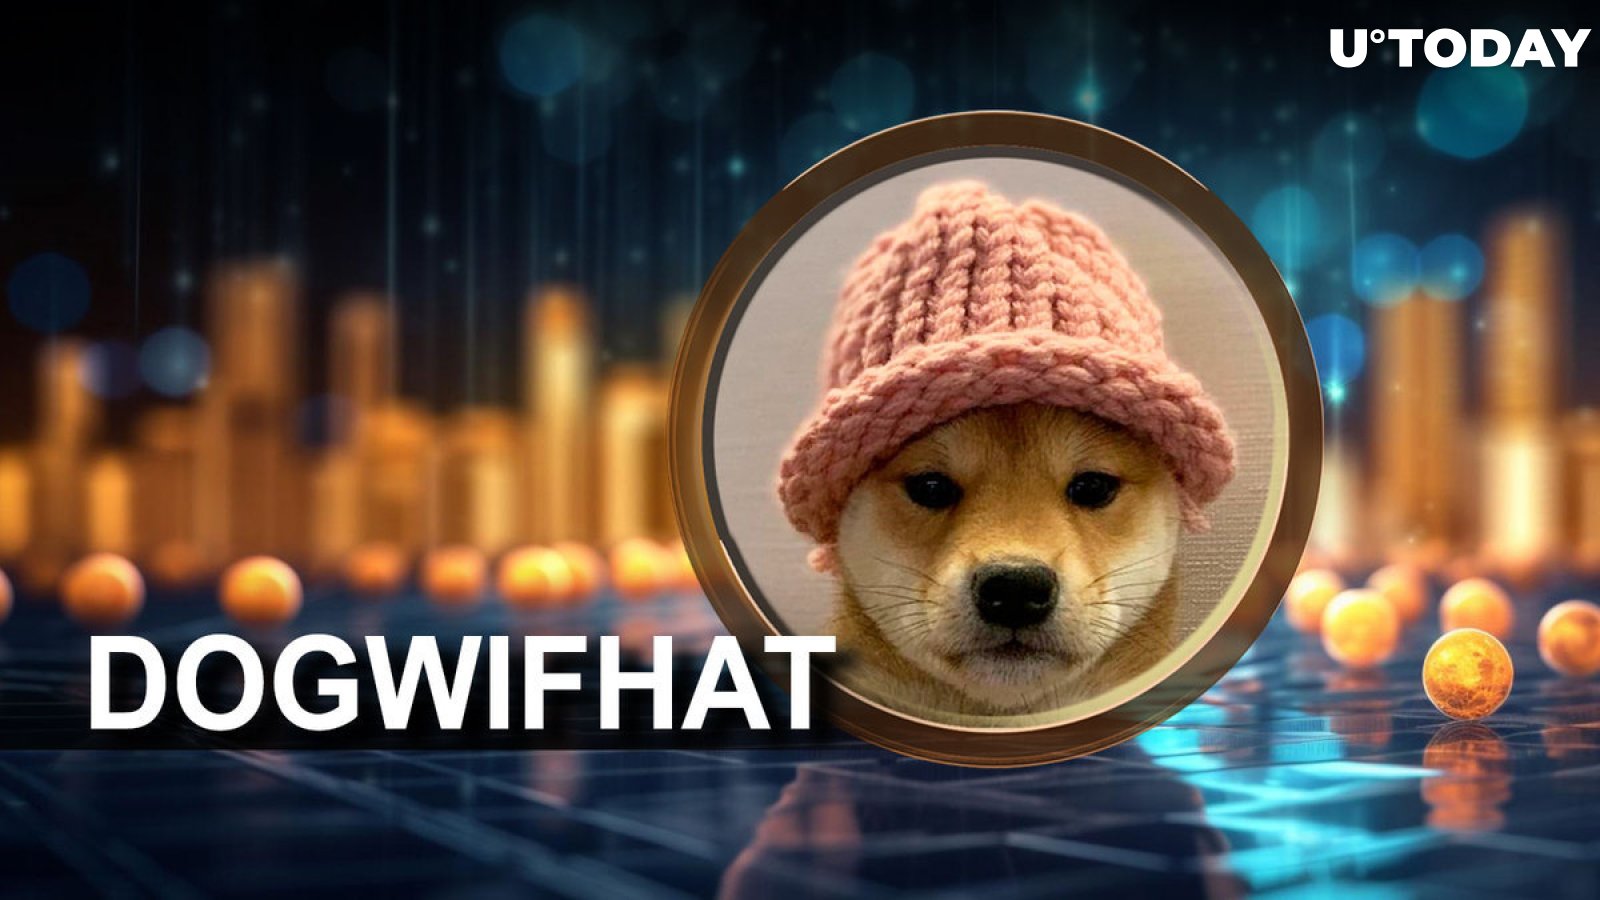 Dogwifhat (WIF) Price Jumps 20% as Solana Meme Coin Takes Over Top 100